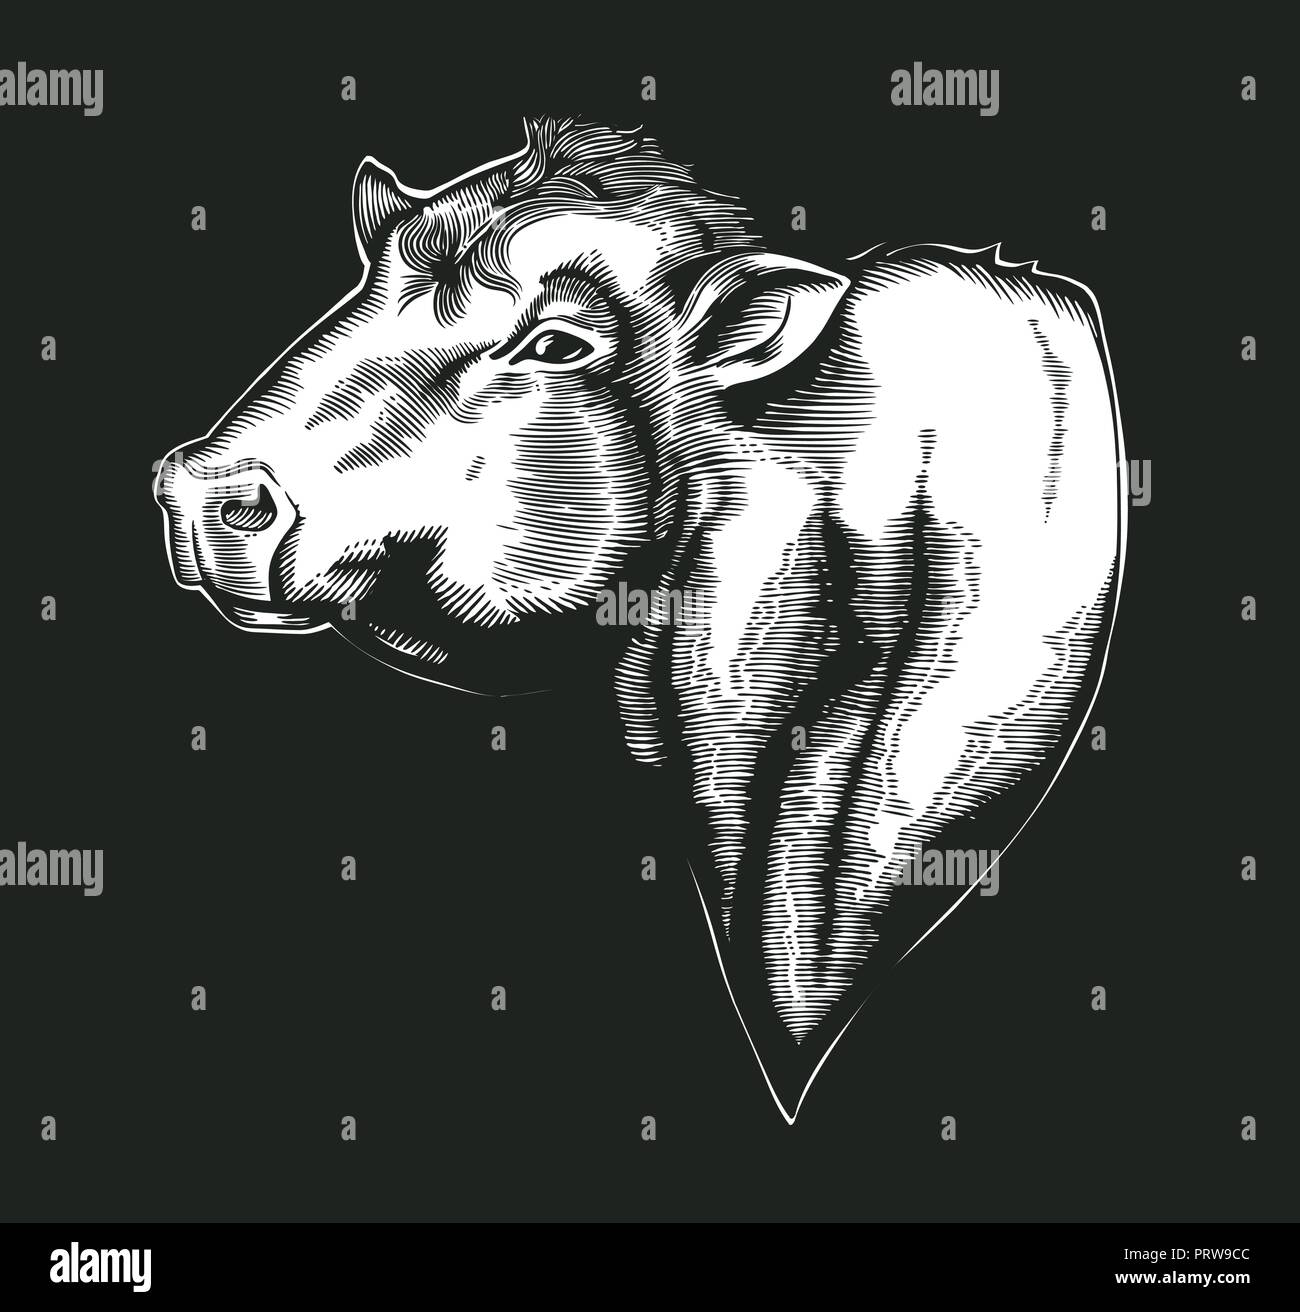 Head of bull of dangus breed drawn in vintage woodcut style. Farm animal isolated on white background. Vector illustration for agricultural market identity, products logo, advertisement. Stock Vector